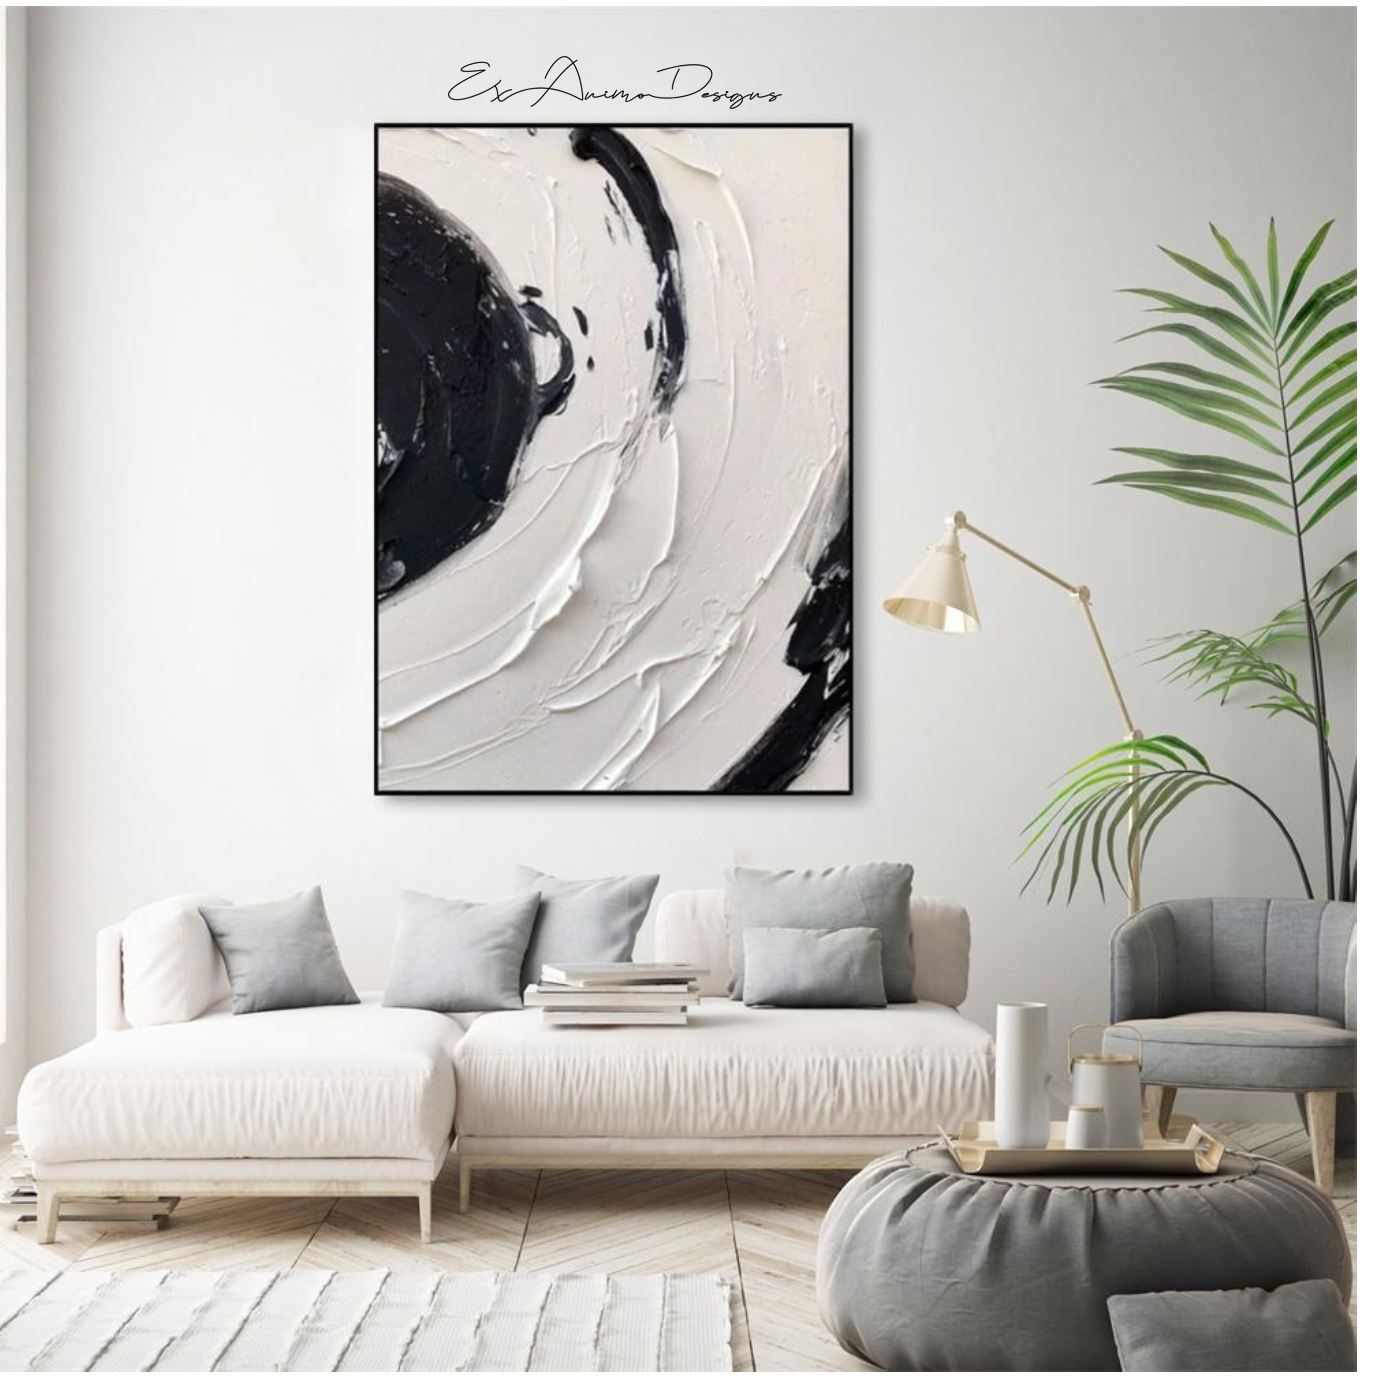 Ex Animo Designs - Black and White Color Wall Art